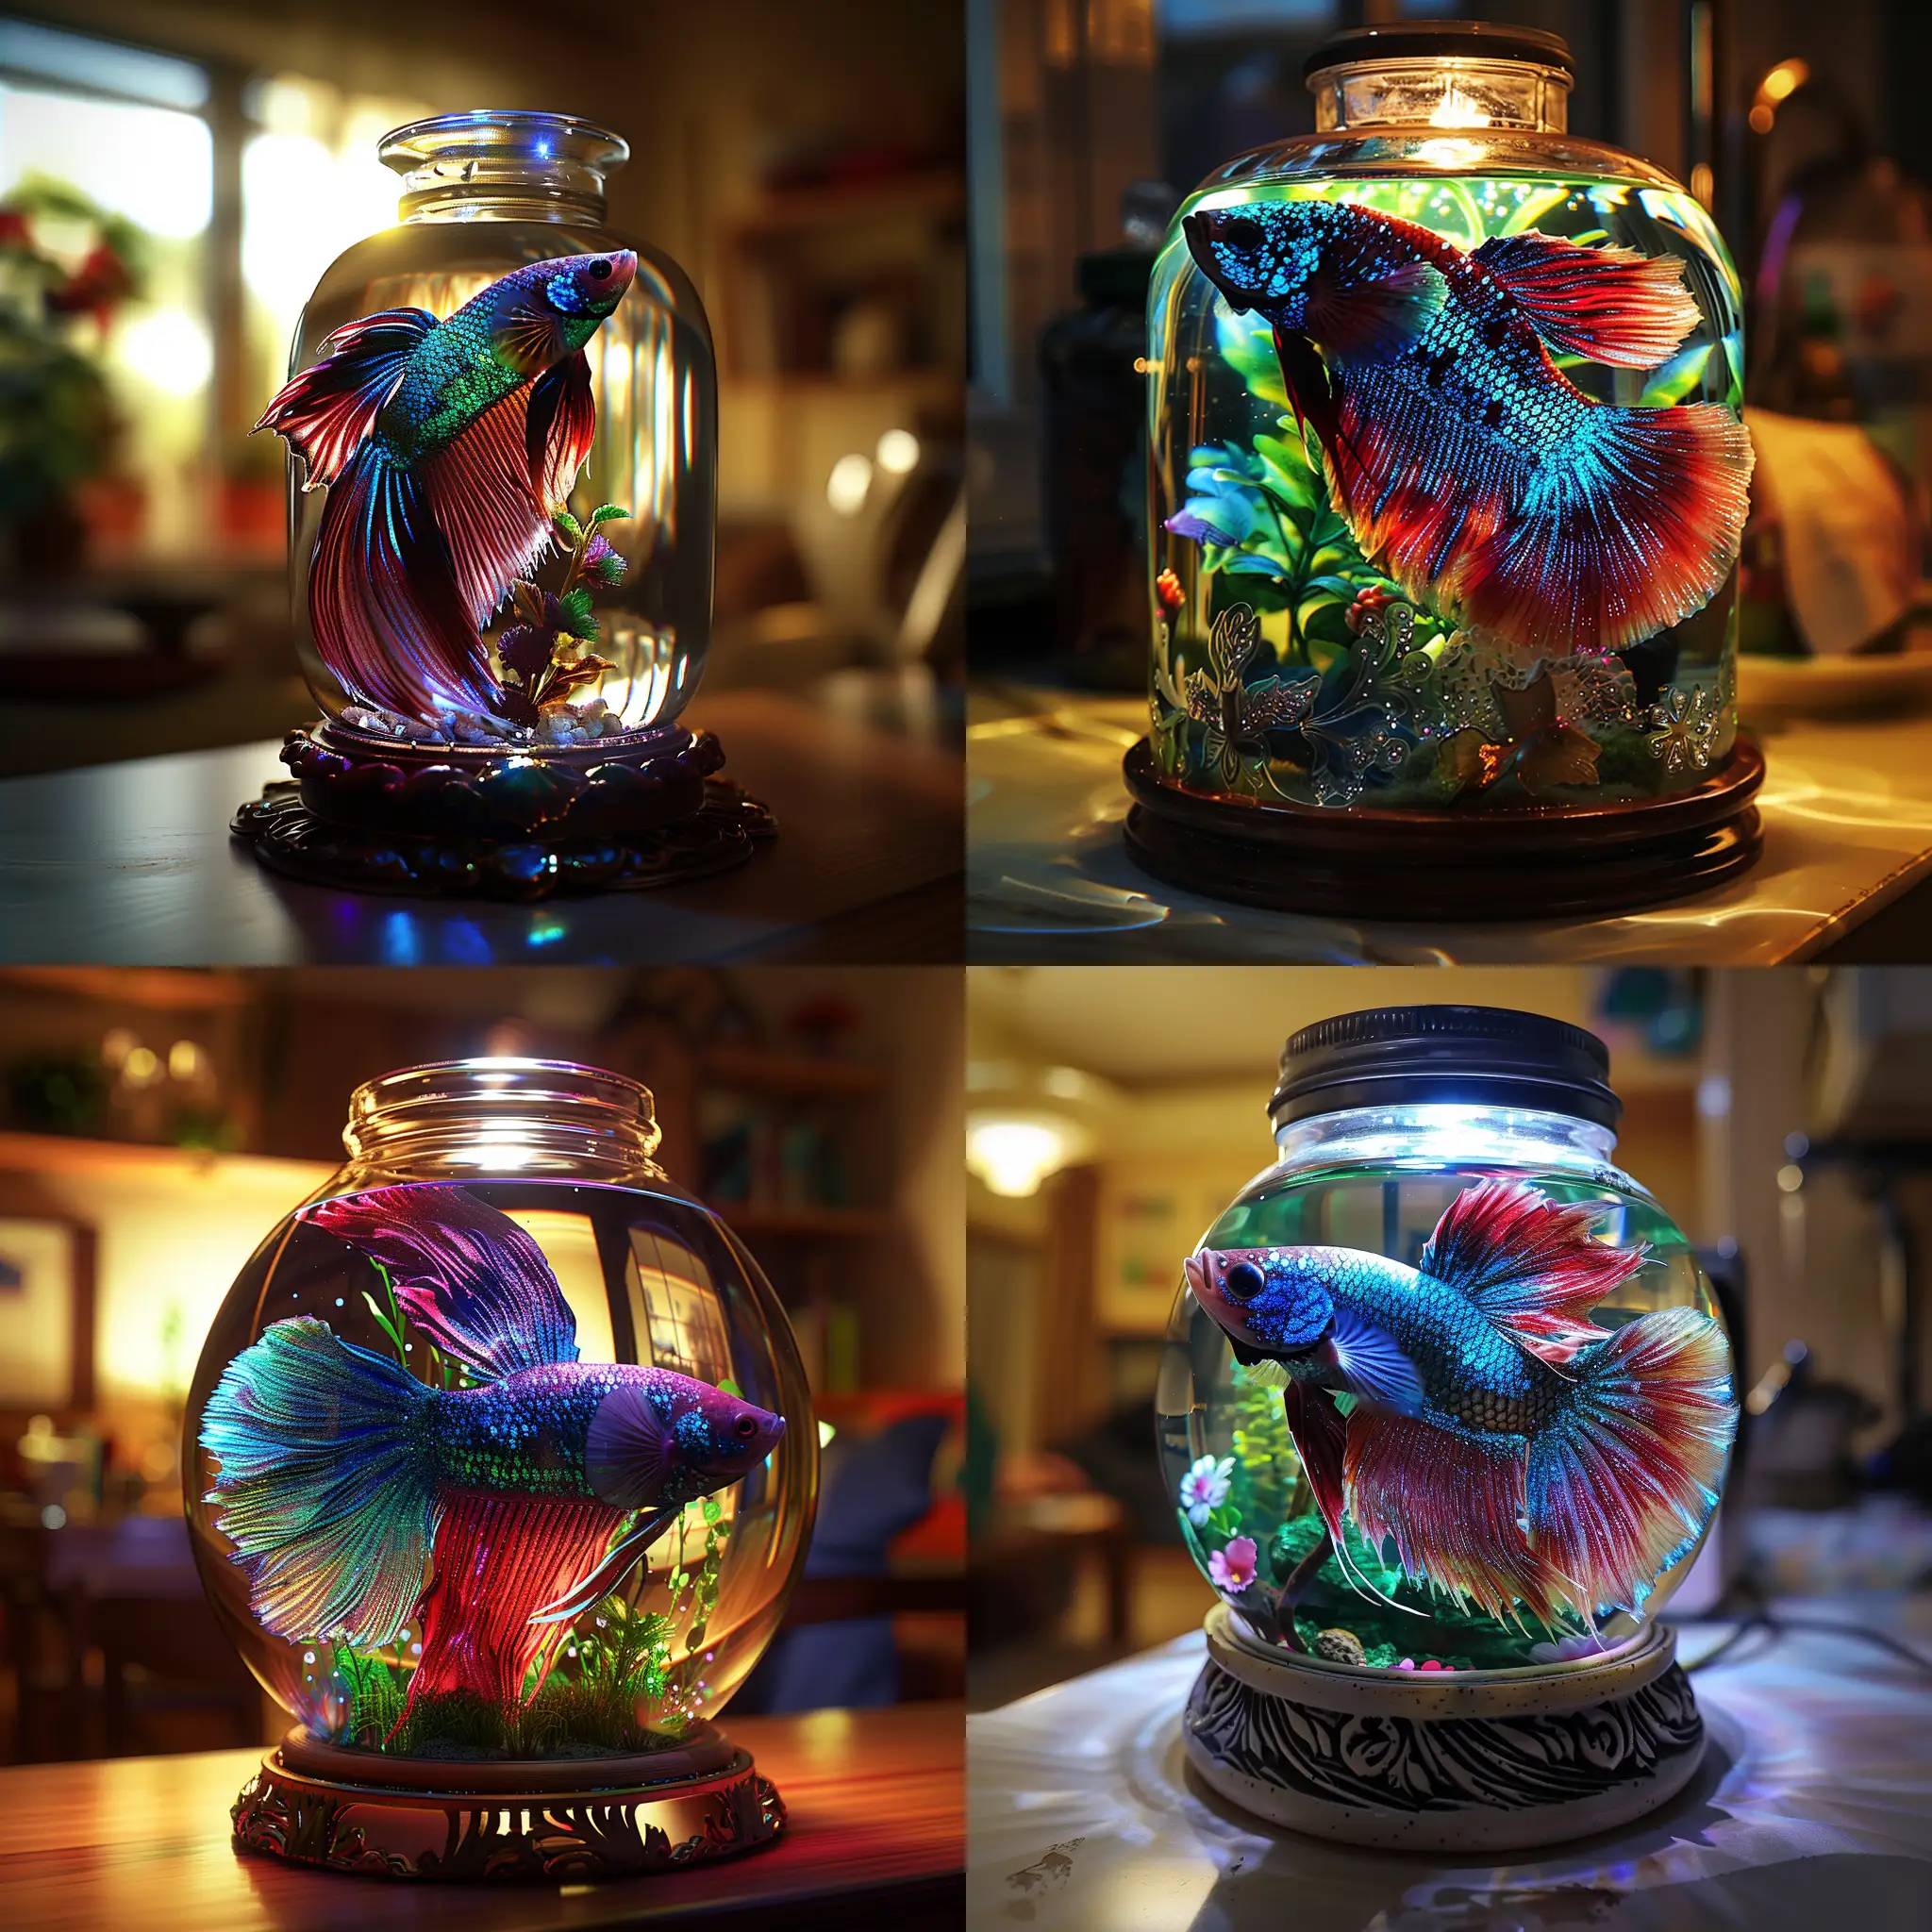 Hyper realistic A stunning beautiful Betta splendens fish in an fairy rounded little forest aquascape with shine bright rich color scheme metallic glitter blue red green purple tosca chameleon colors in underwater island inside round LED glass jar with glass carving floral decorative ornament. standing at counter top,blink blink dot light effect, Cinematic, very realistic, very natural, Ultra-high detail, body full-length. Background calm and warm cozy room.